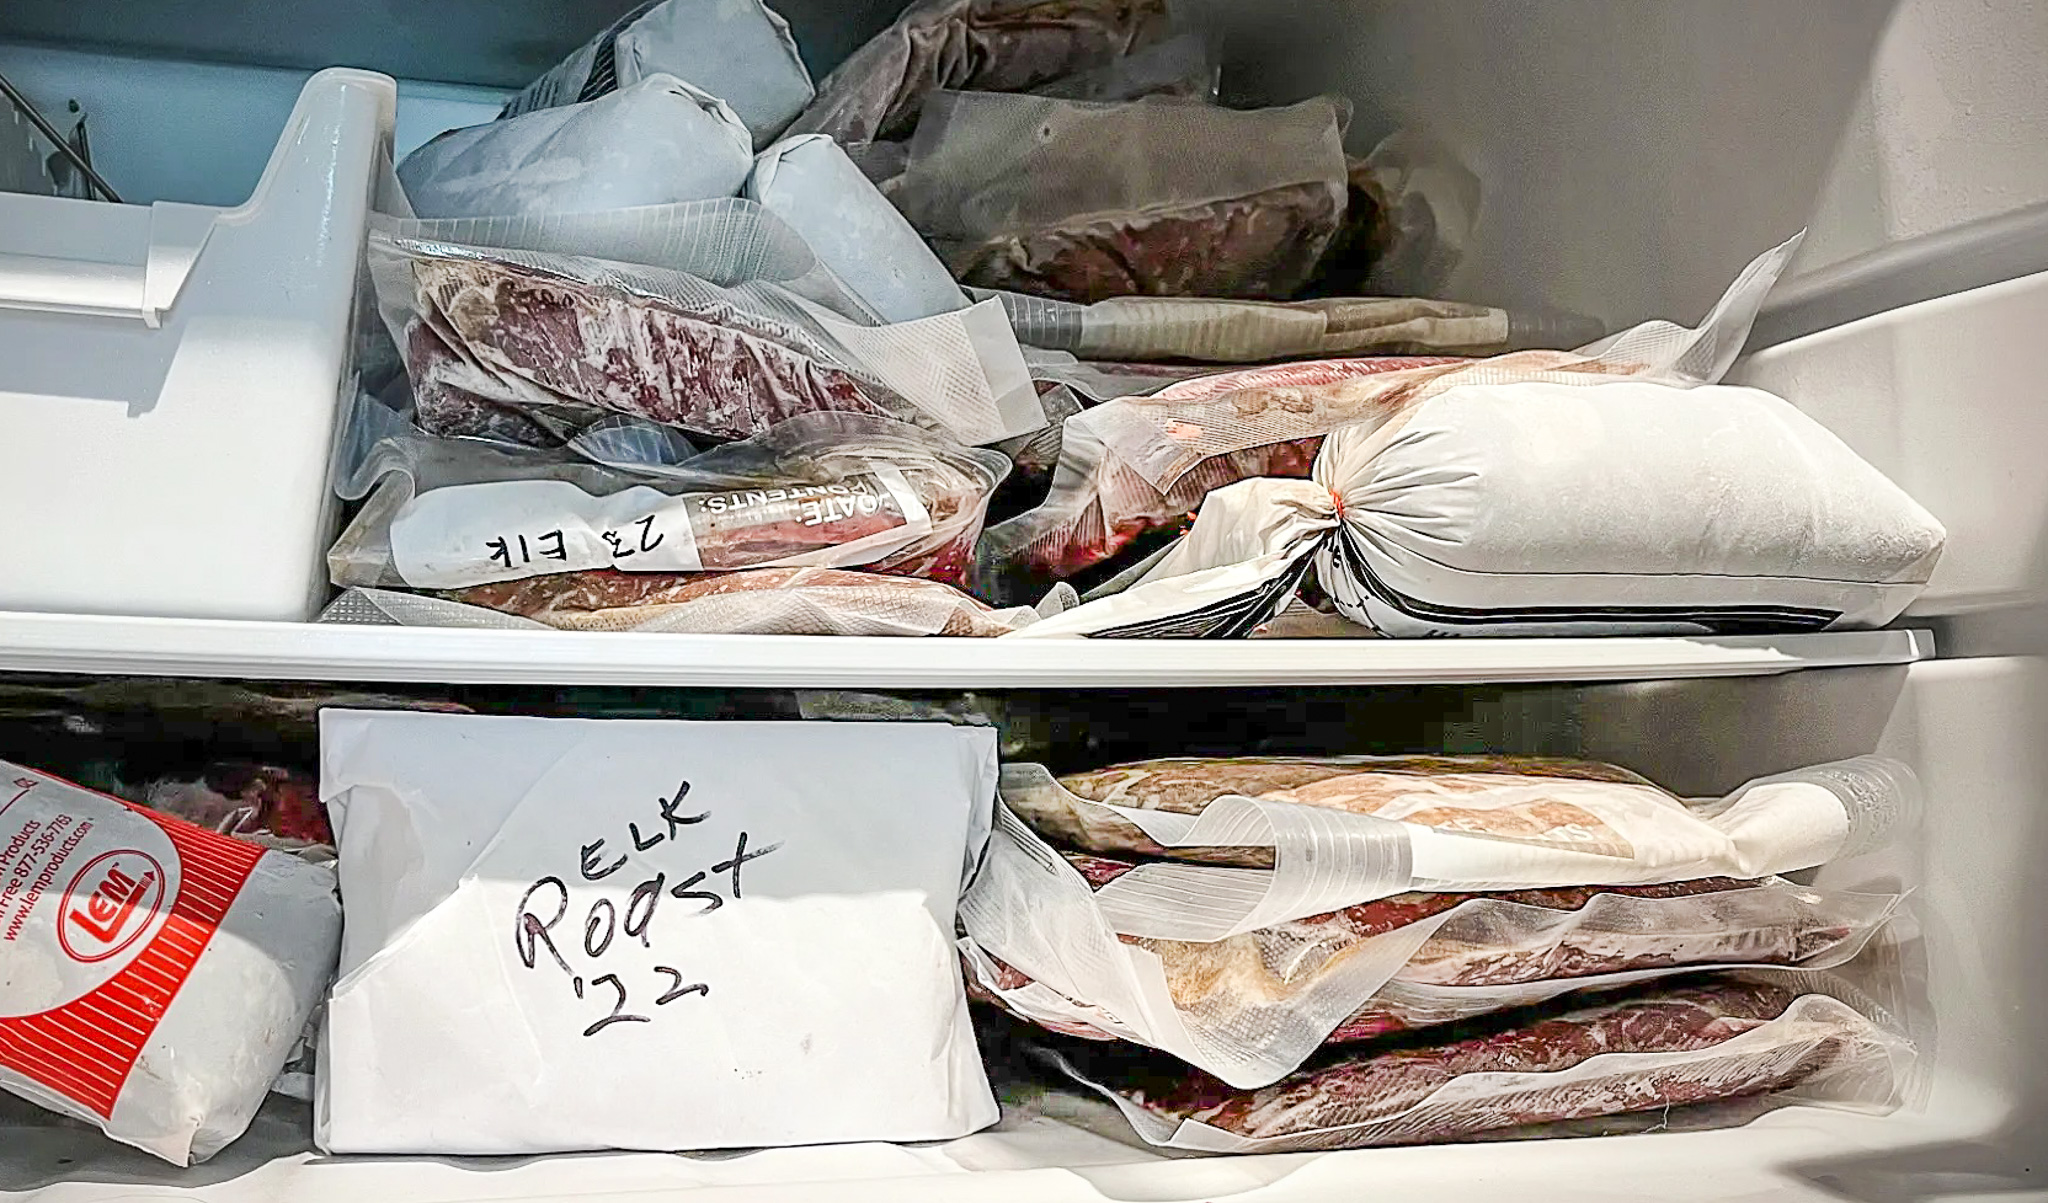 How Long Does Meat Last in the Freezer?